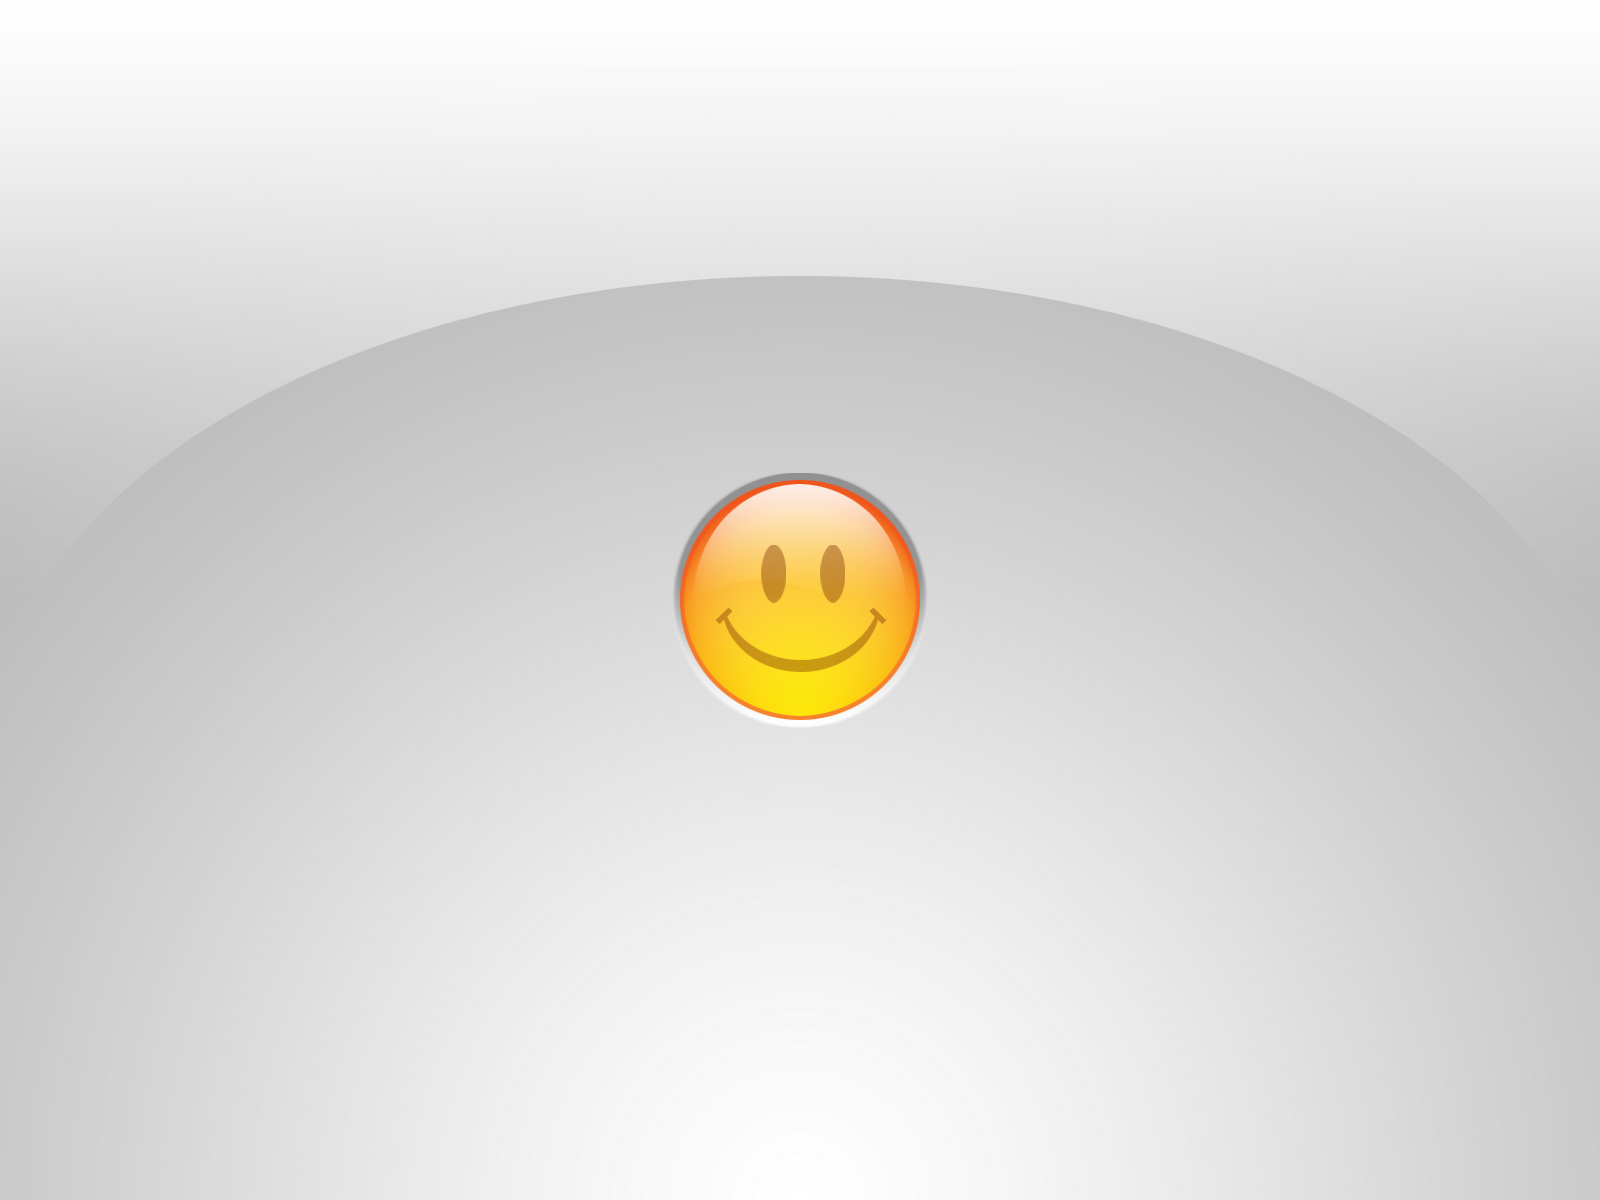 Smiley Face Grey Background - HD Wallpaper 